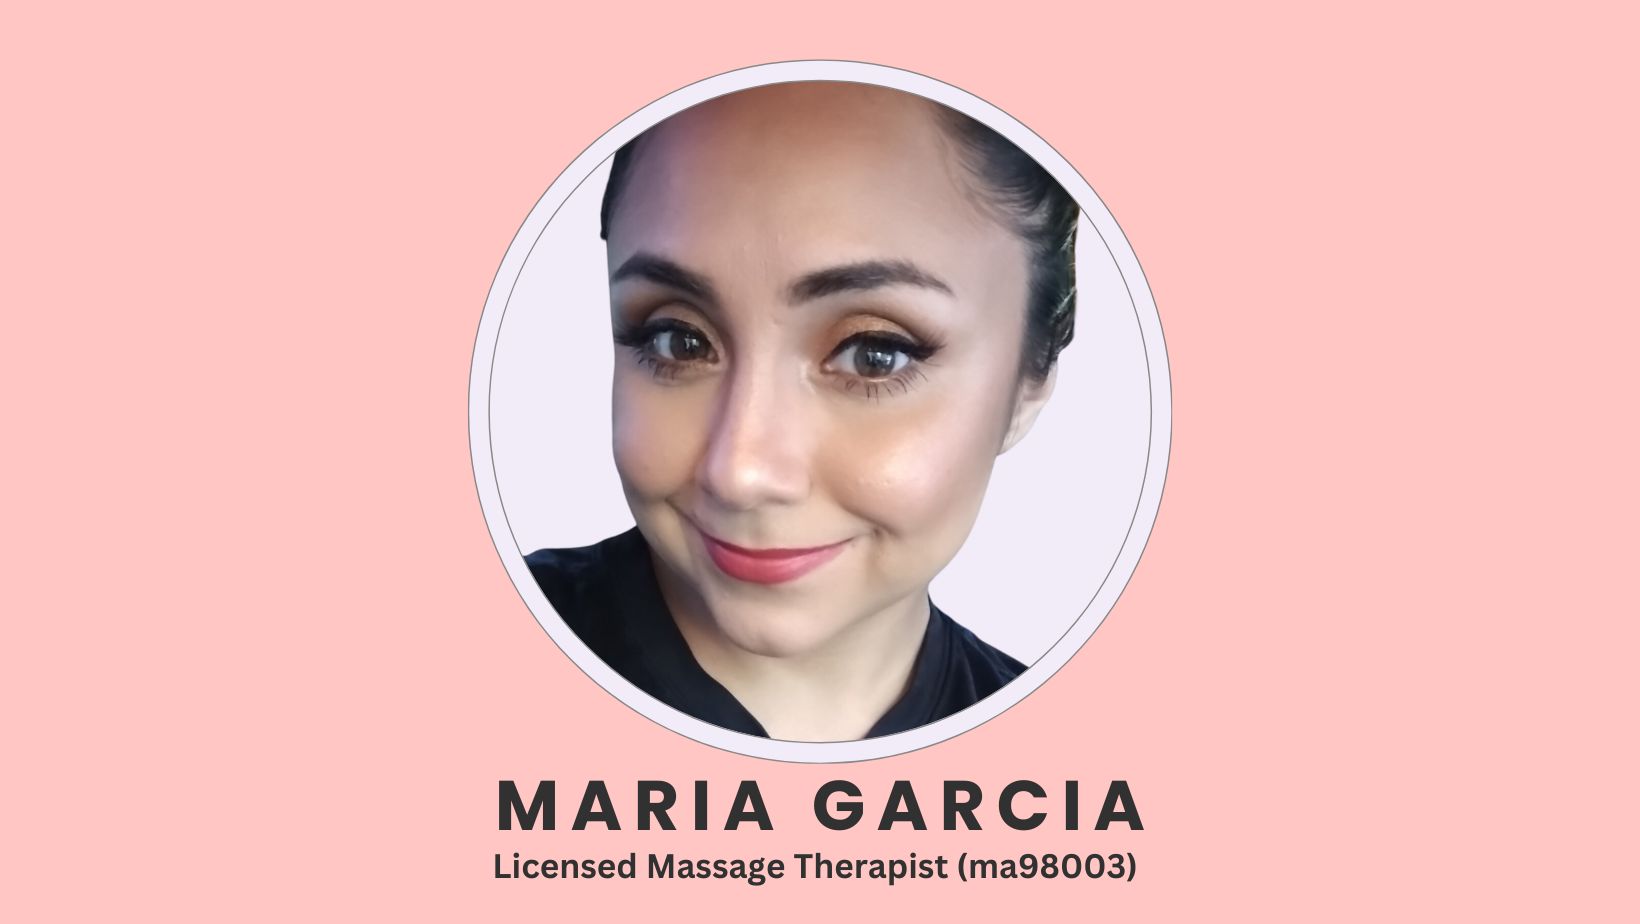 Maria Garcia, a female licensed massage therapist with nine years of professional experience, is a highly skilled mobile massage therapist serving Jacksonville and St. Augustine, Florida.